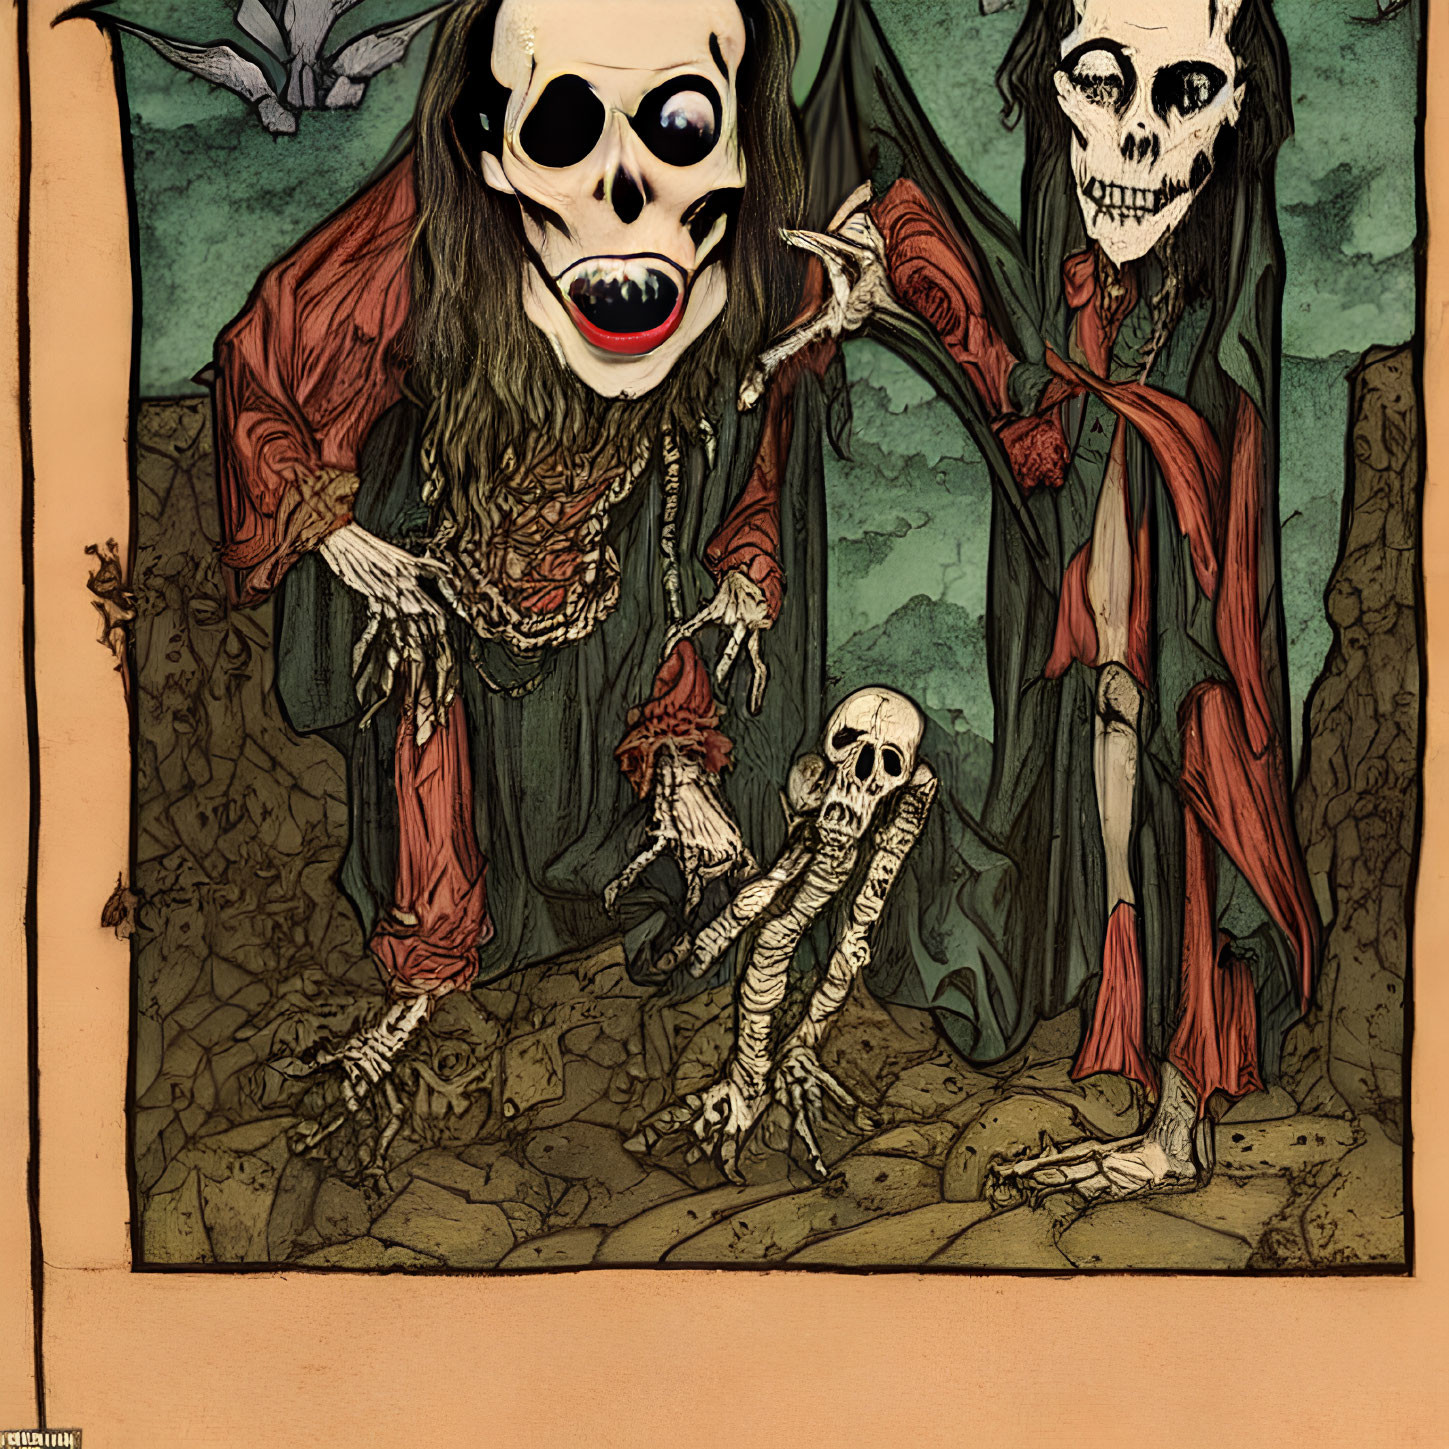 Two skeletal figures in tattered robes with grinning skull faces in spooky setting